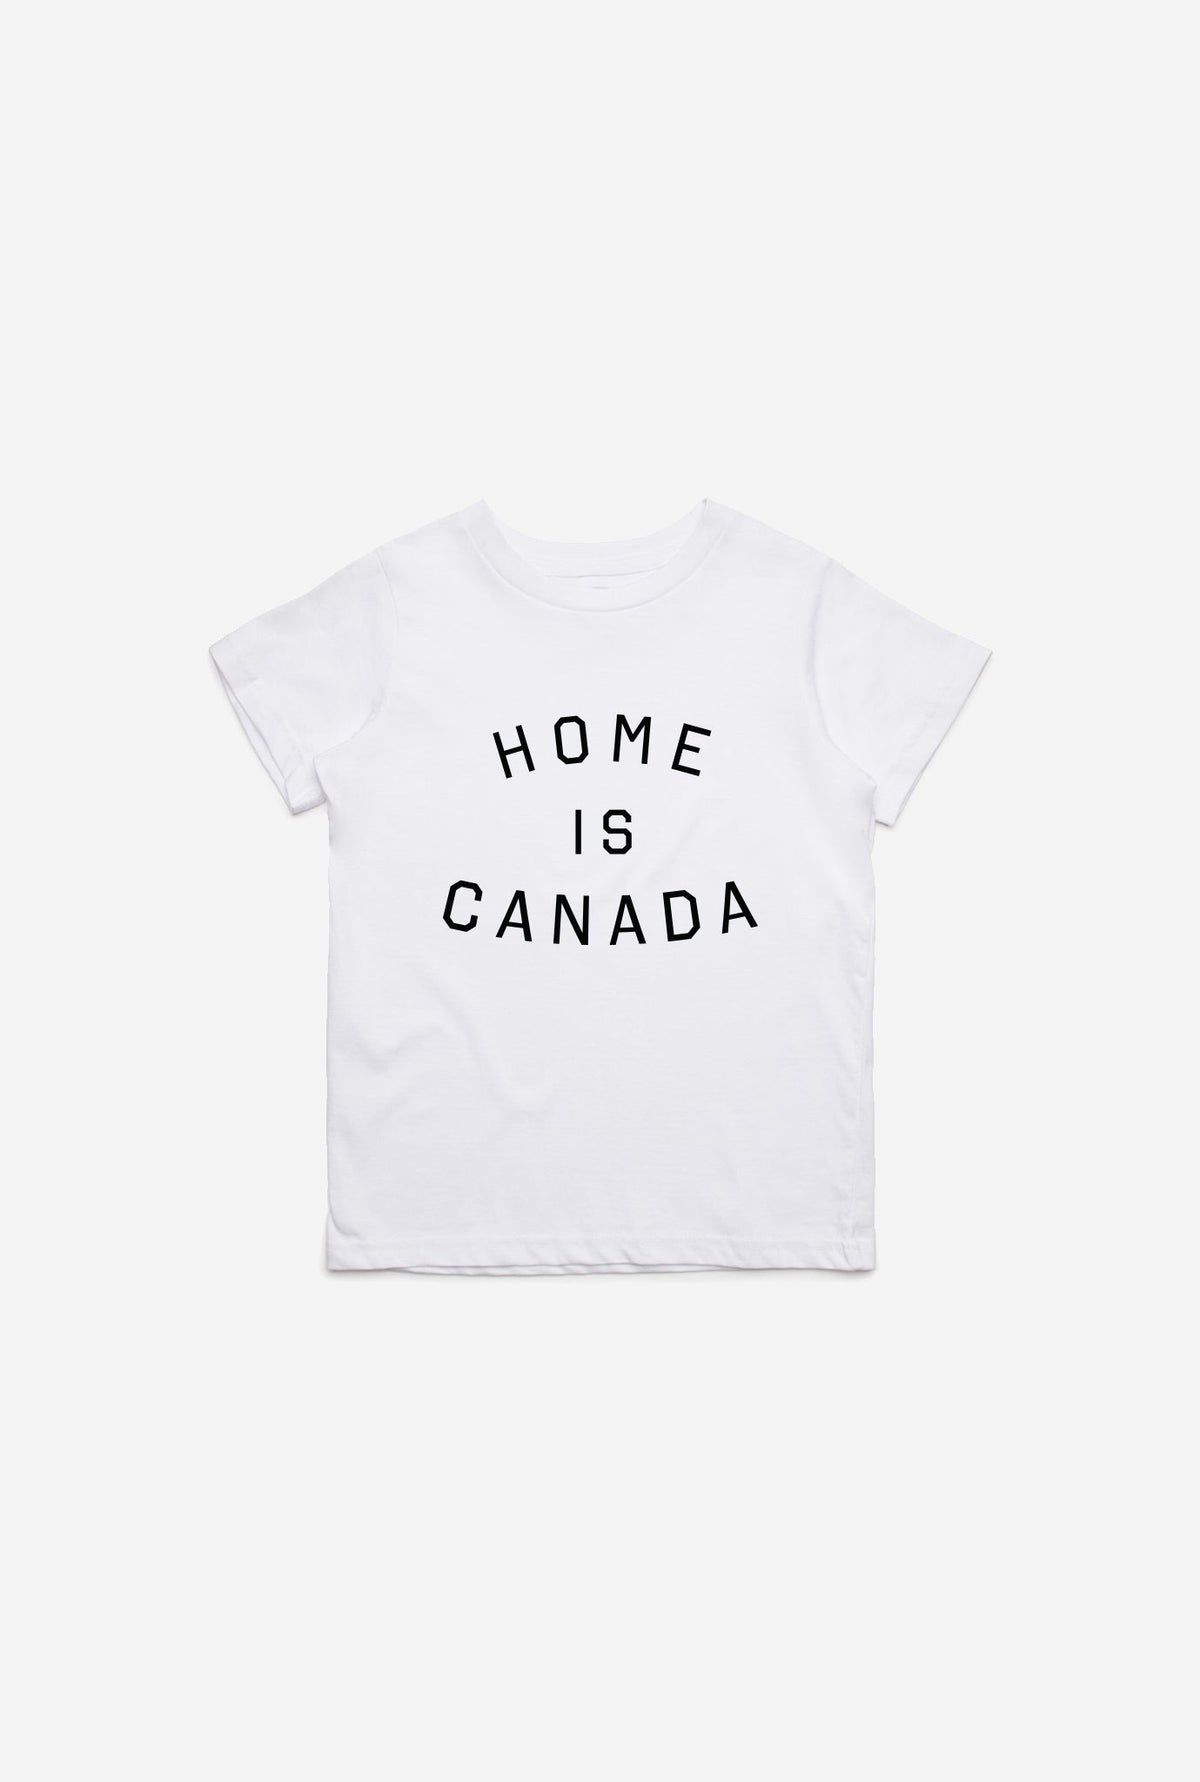 Home is Canada Kids T-Shirt - White